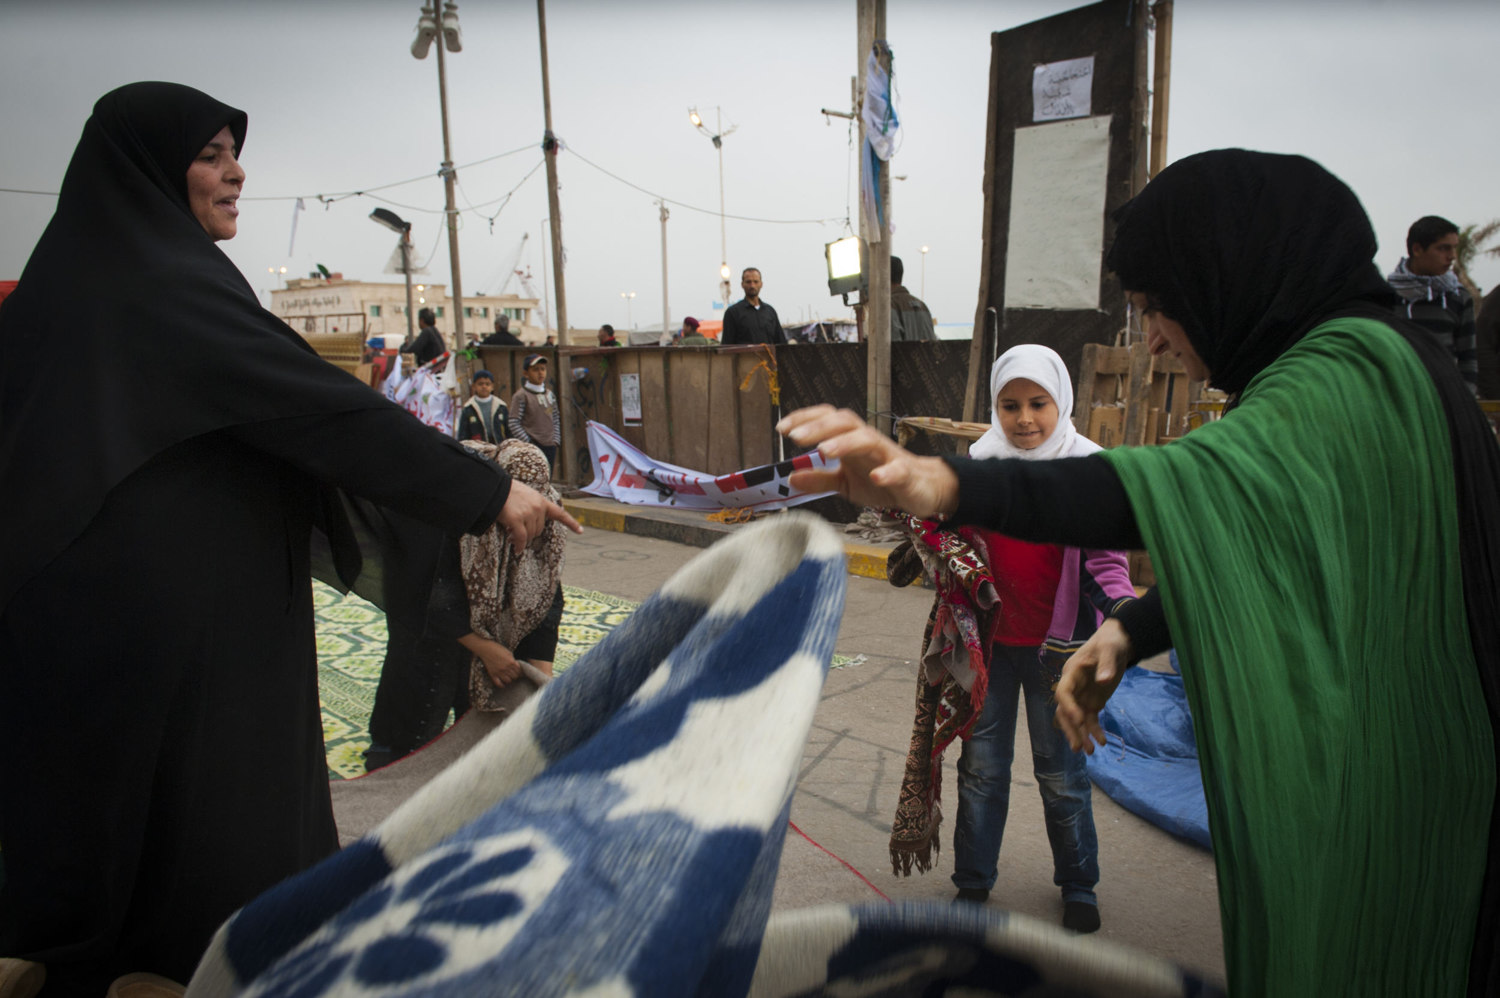  Women setup prayer rugs before Friday Prayers in front of  Benghazi's downtown courthouse, where men and women pray for safety and for the end of Gaddafi's reign. After a violent battle, the resistance members in Benghazi overtook city and set up an